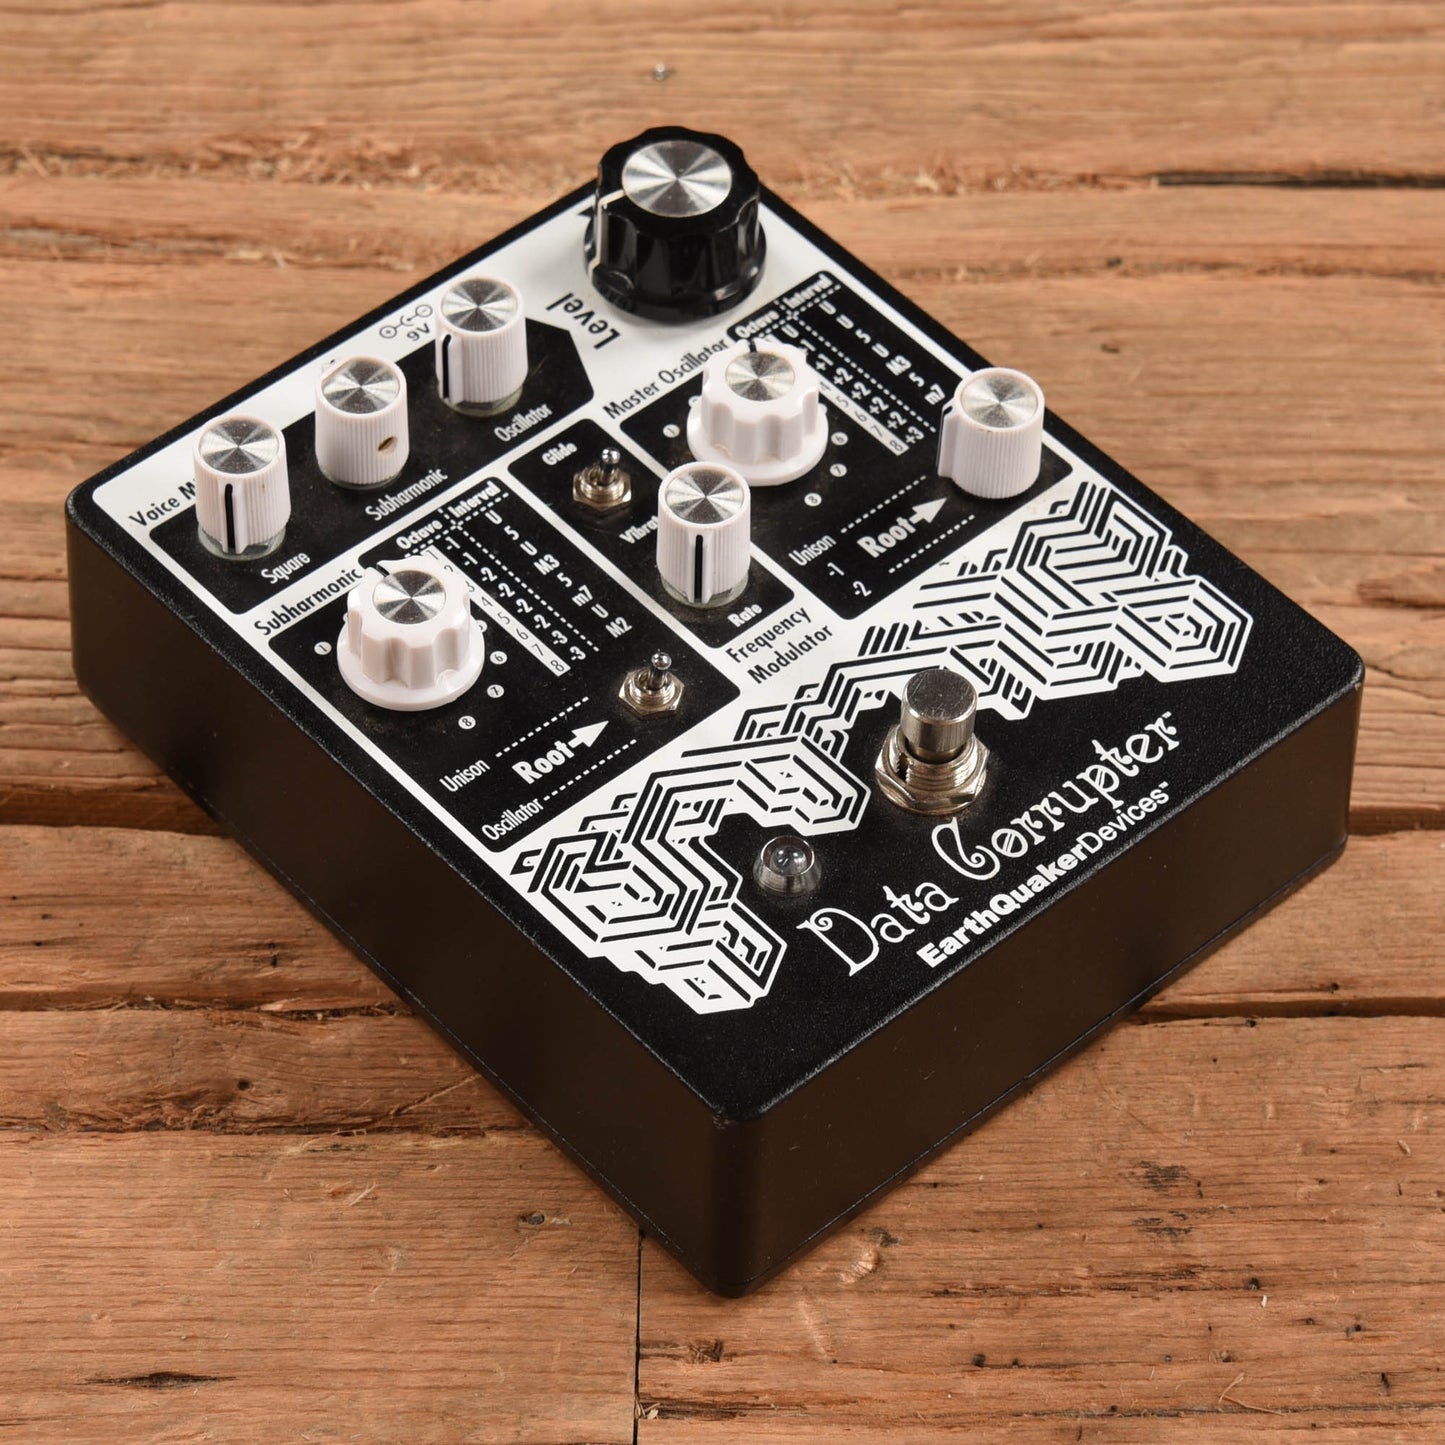 Earthquaker Devices Data Corrupter Modulated Monophonic Harmonizing PPL